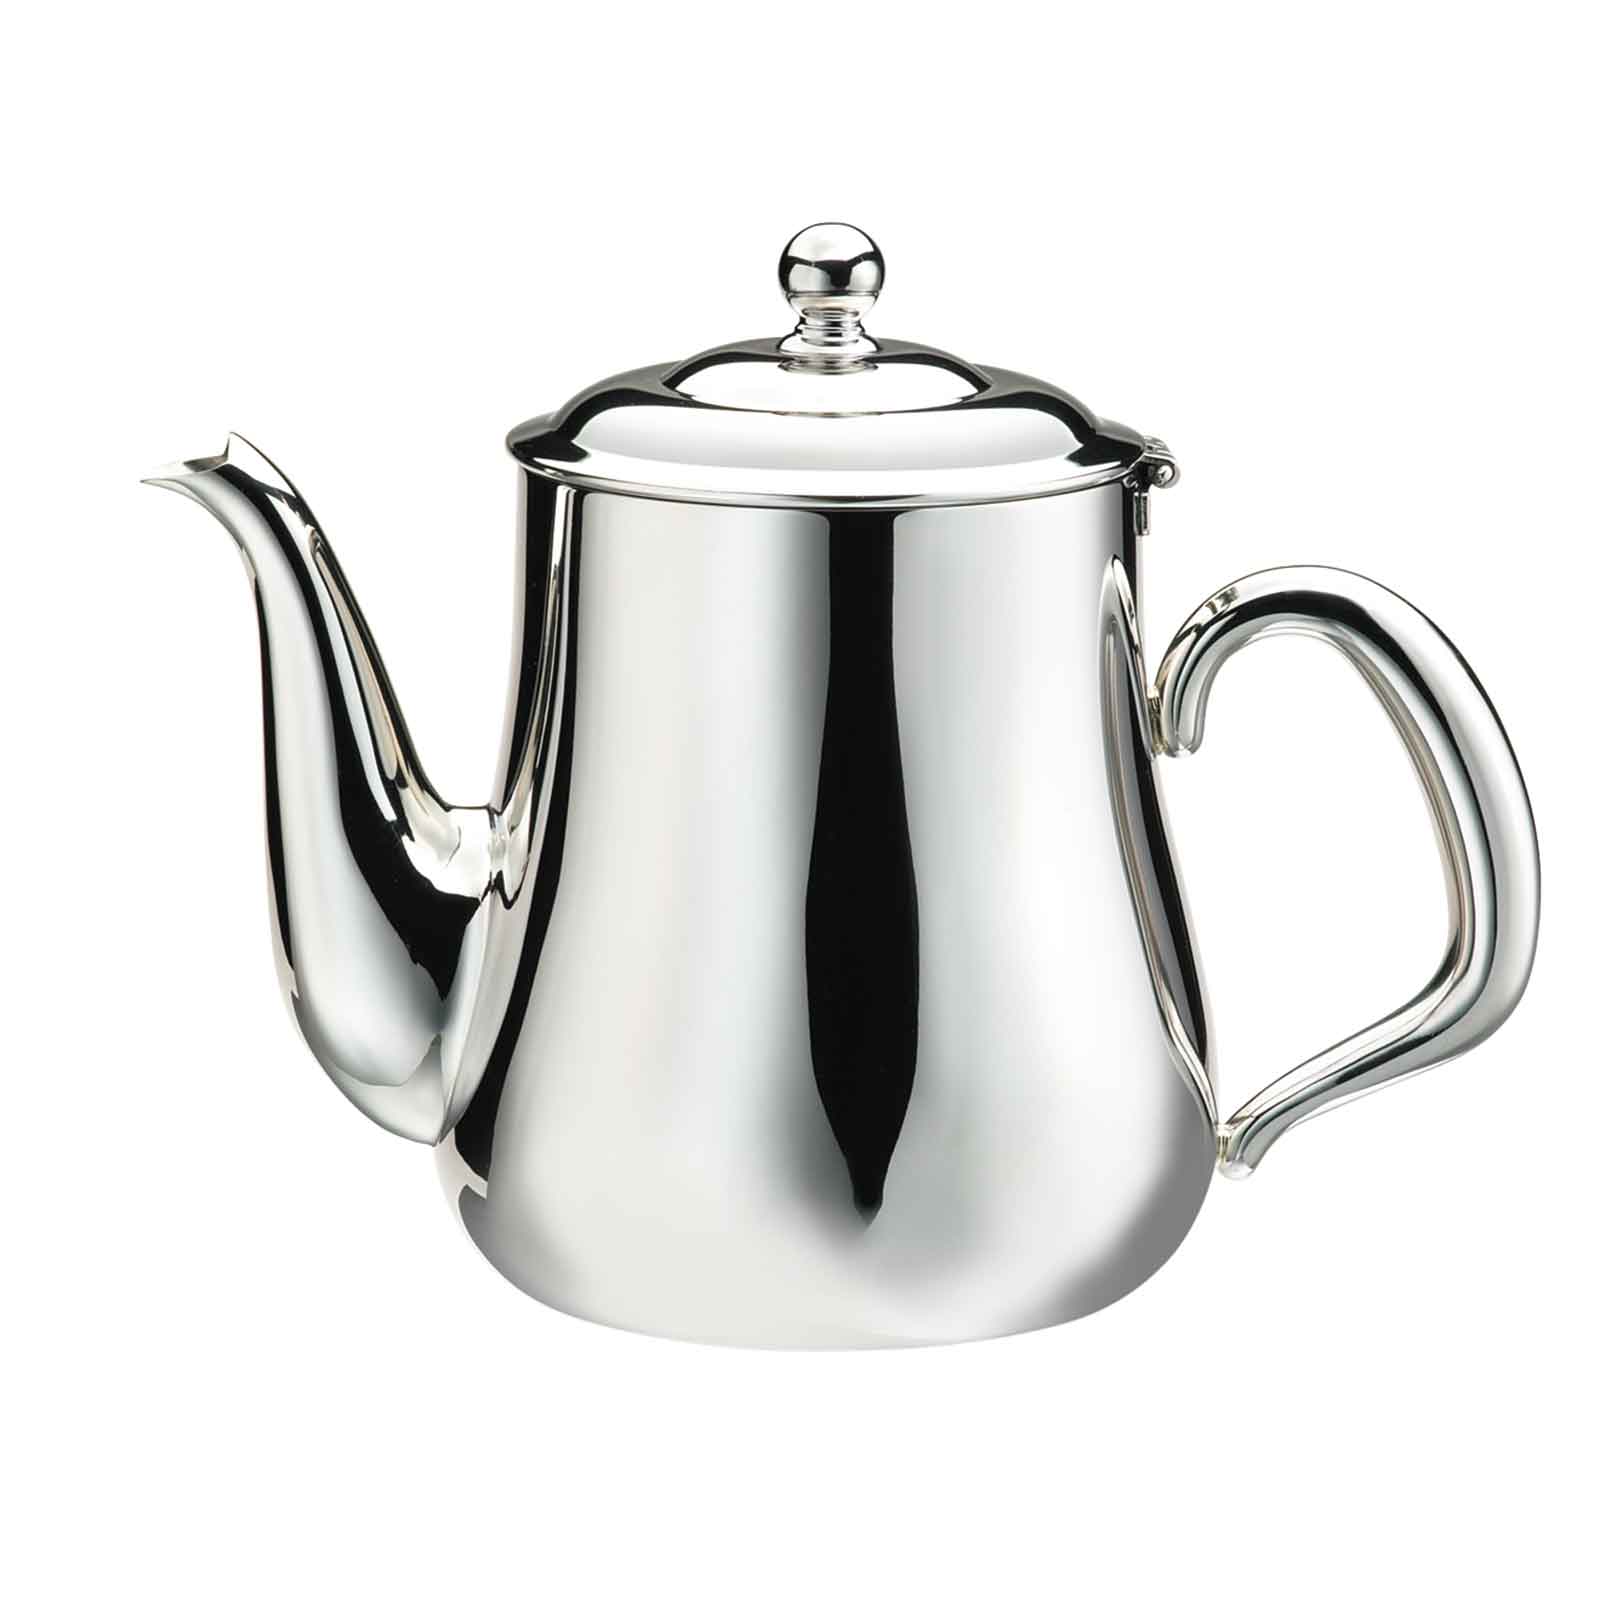 Walco Stainless CX520 Coffee Pot/Teapot, Stainless Steel, Holloware